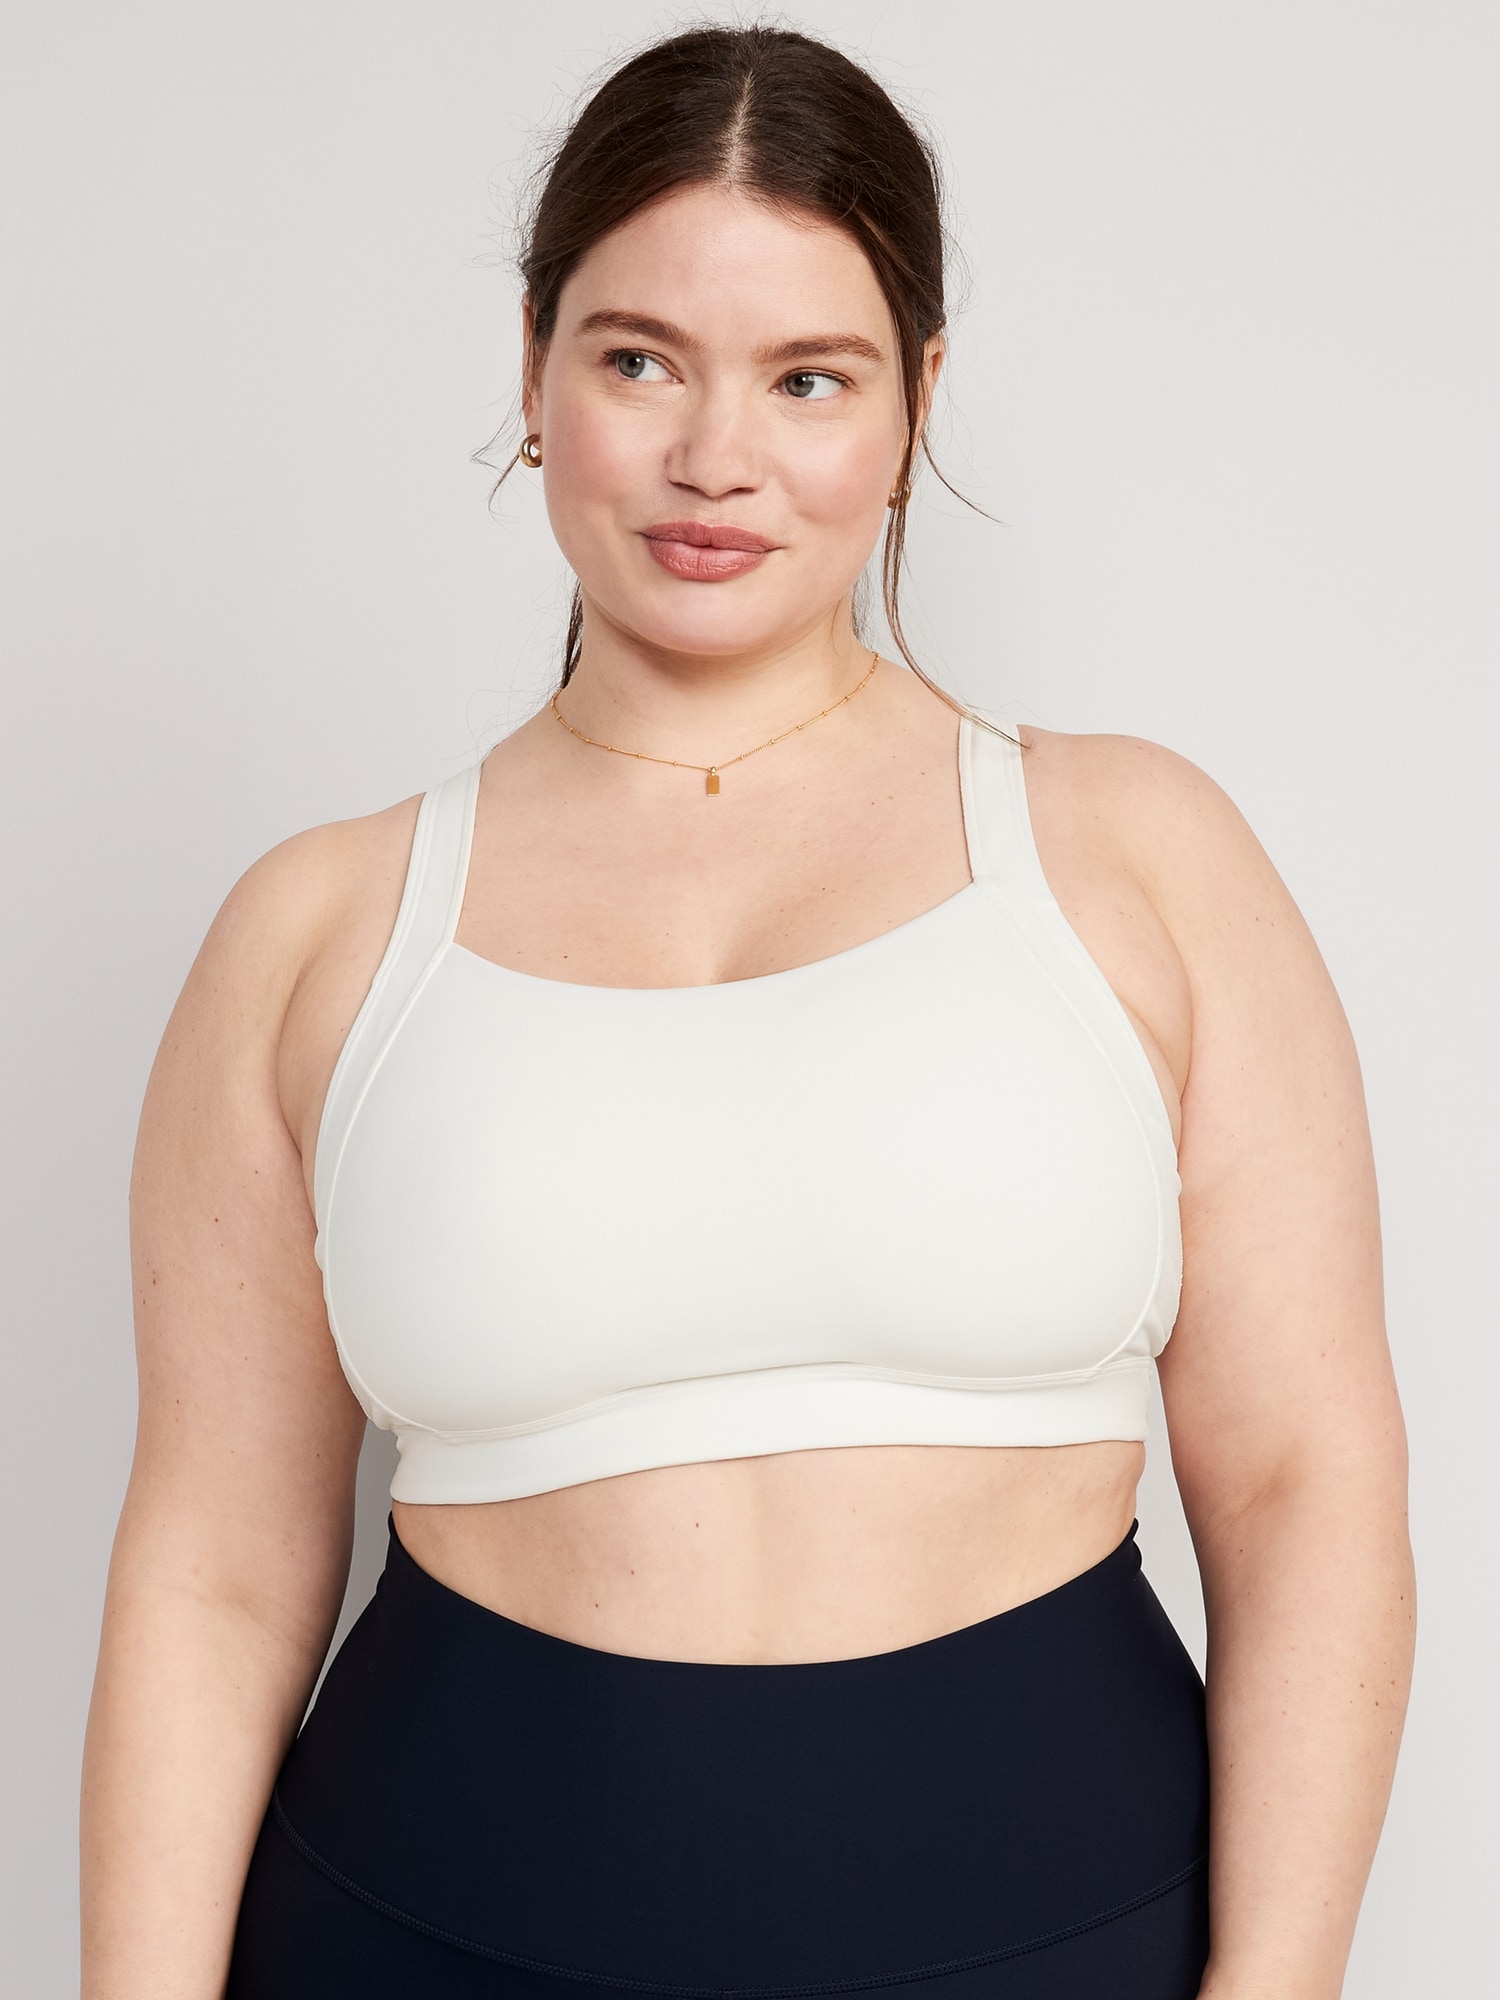 Old Navy - High Support Racerback Sports Bra for Women 2X-4X